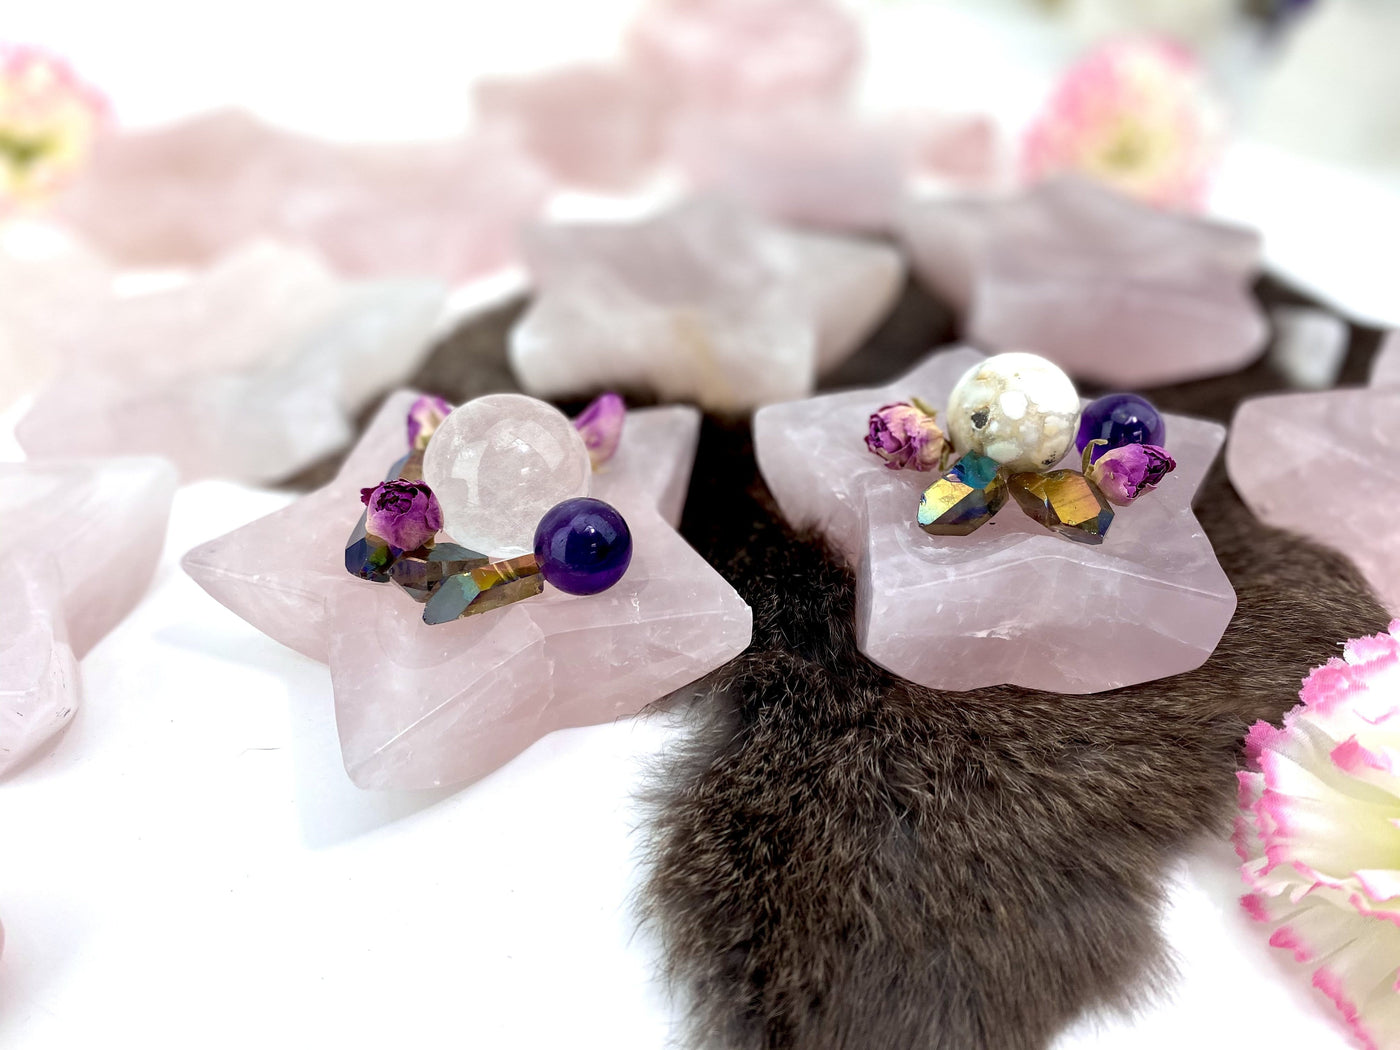 2 Rose Quartz Stone Star Dishes filled with crystals with others blurred in the background